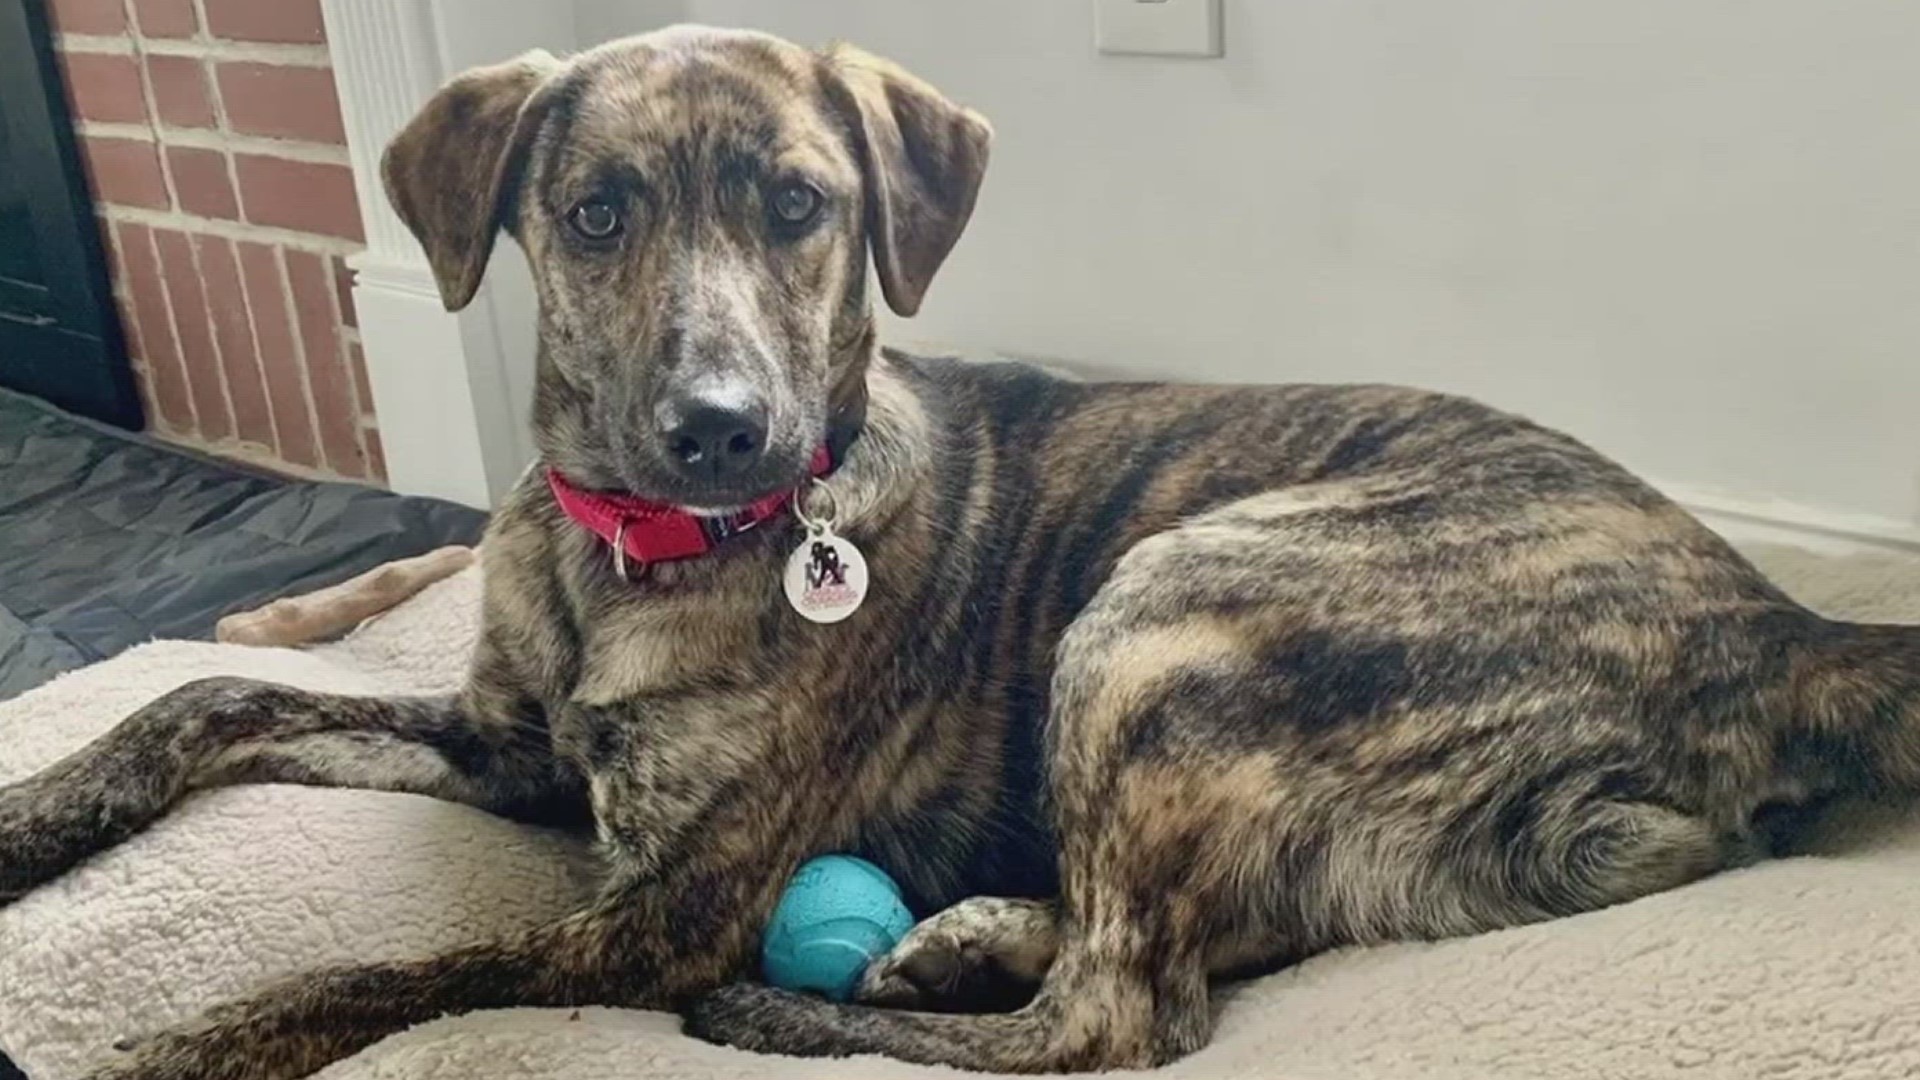 Noel's current foster parents say she enjoys romping outside and will need a yard with a 6-foot fence, as she's proven to jump over smaller ones.